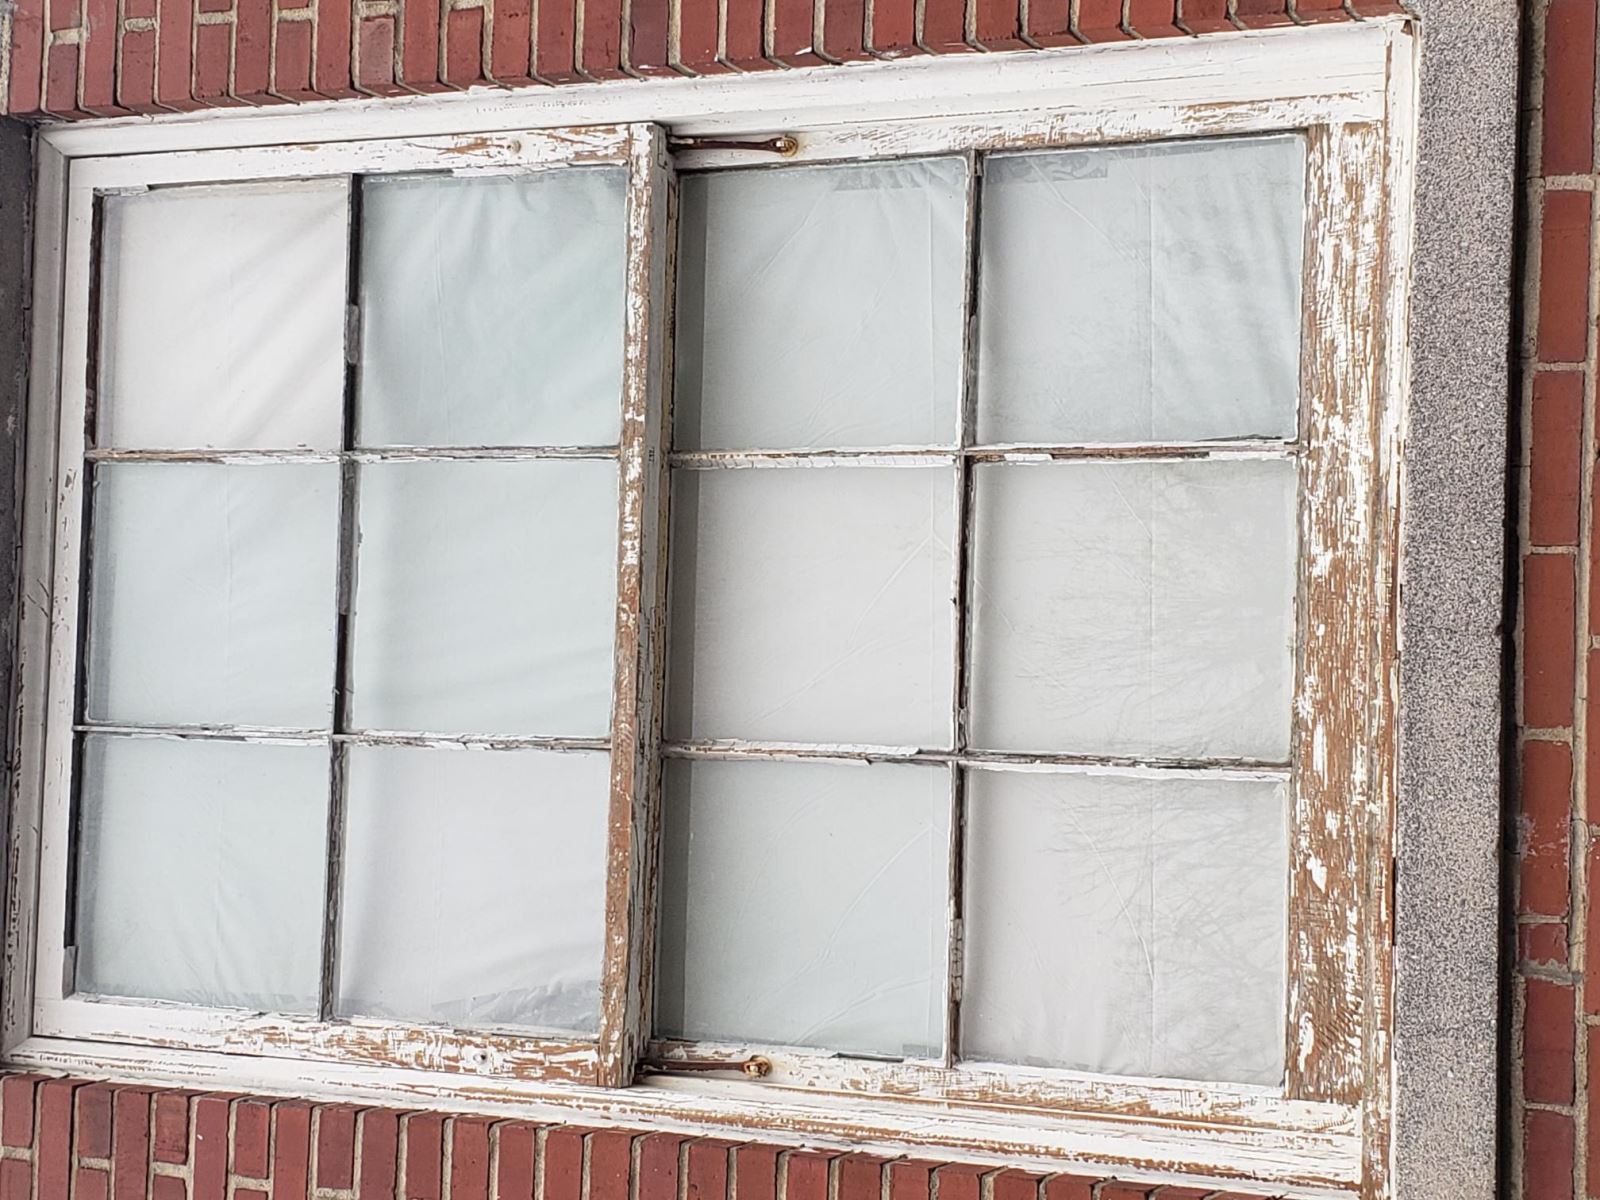 Lincoln School, Abatement of Lead based paint from Exterior windows